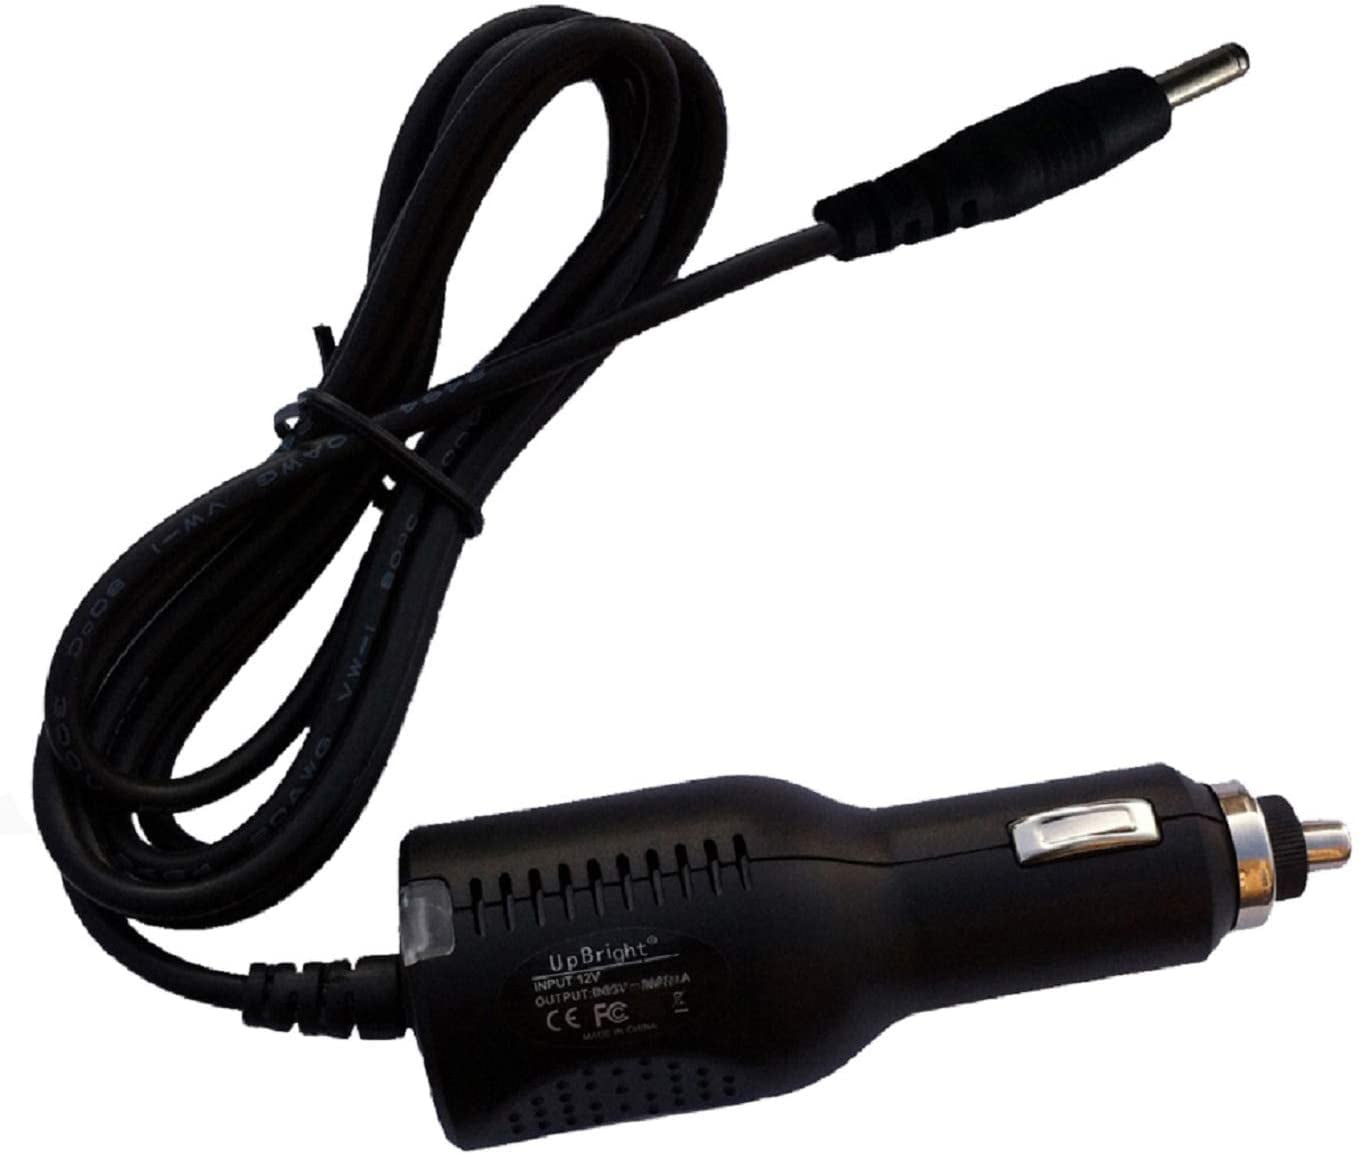 AC Adapter for Black&Decker CHV1510 Cyclonic Cordless Dustbuster Hand Vacuum 